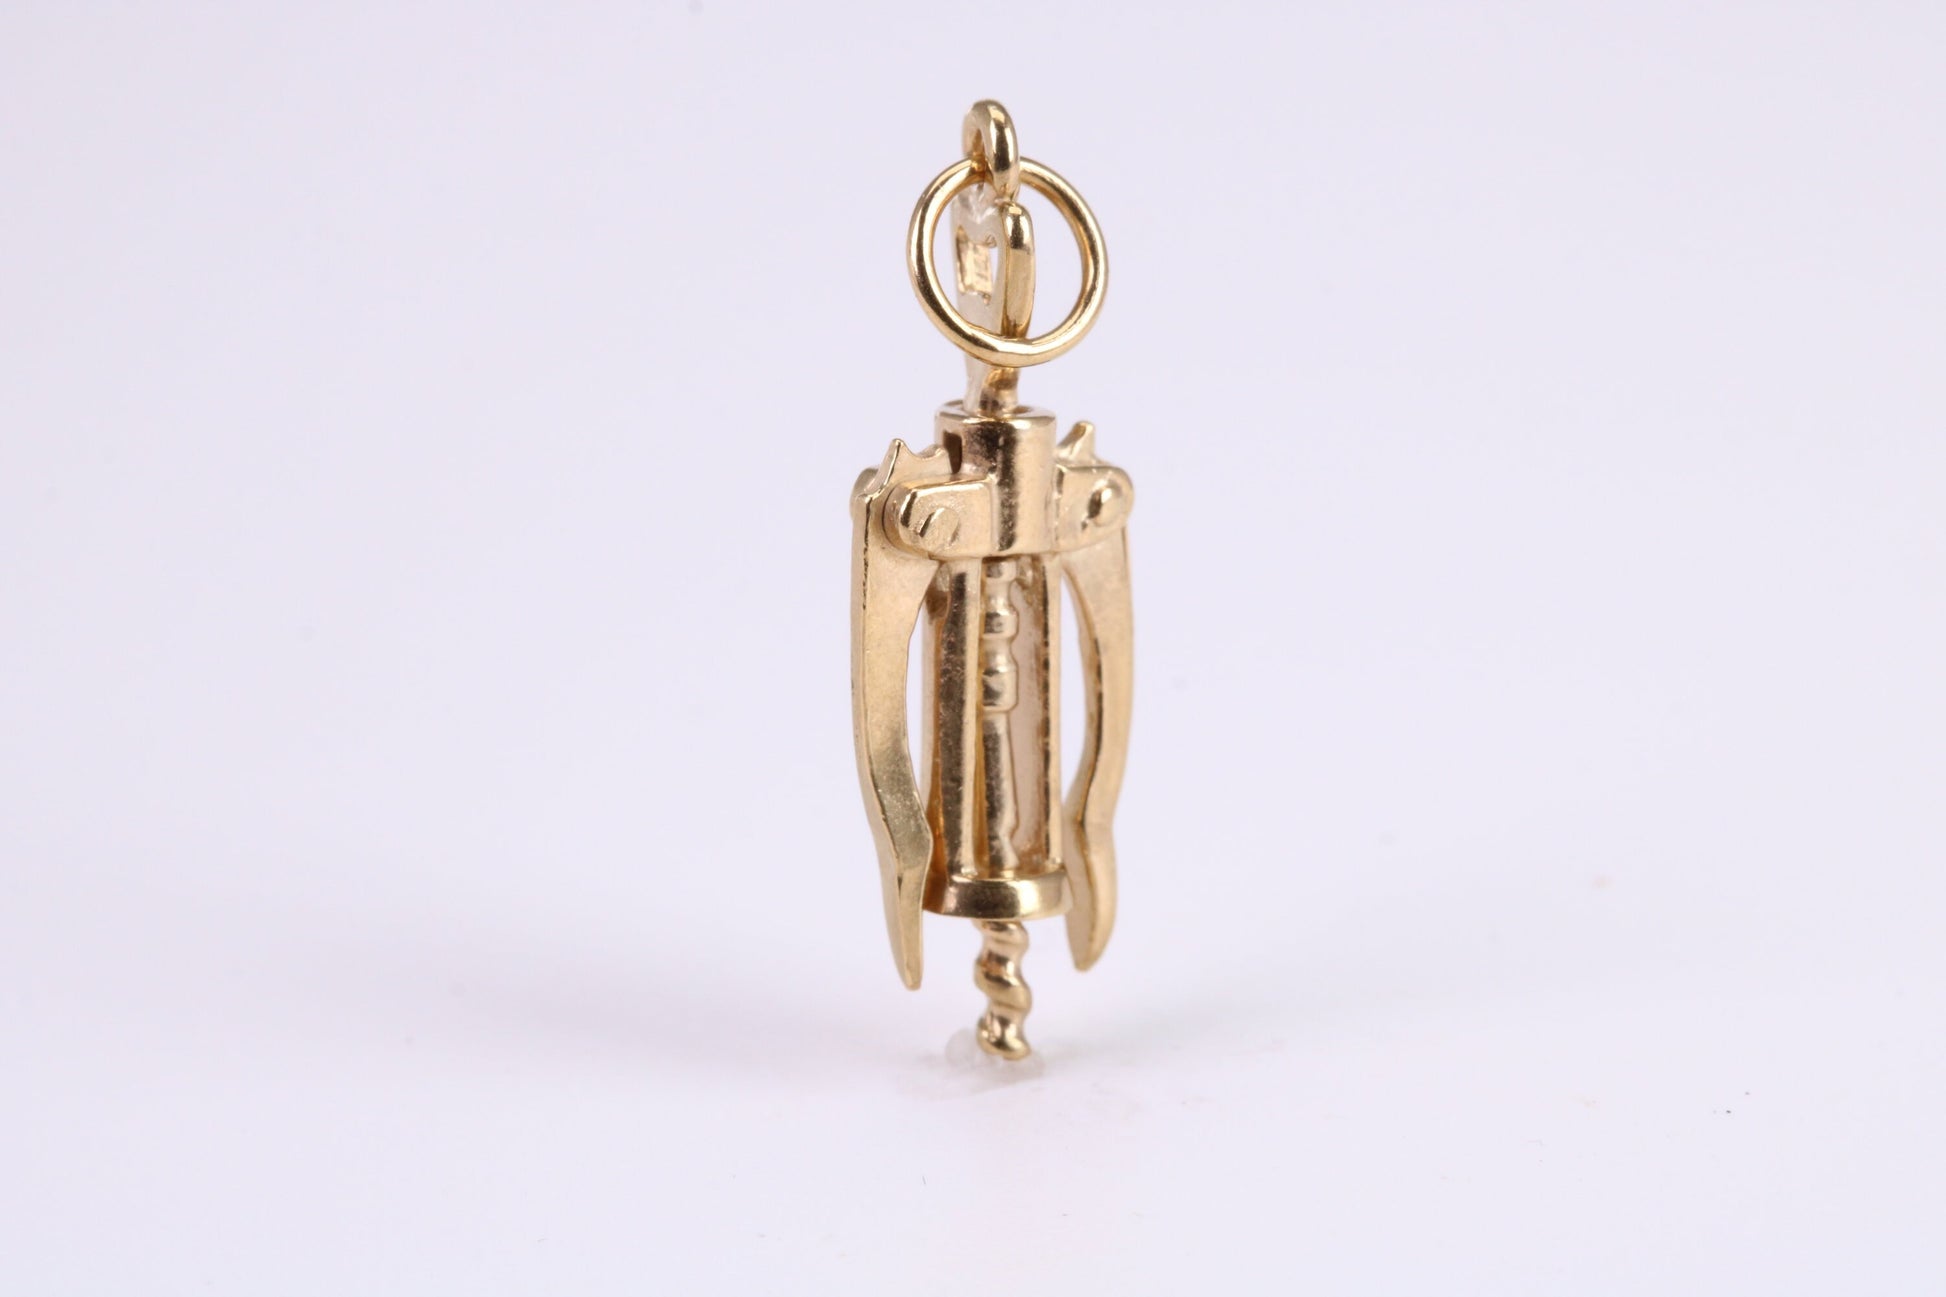 Wine Bottle Opener Charm, Traditional Charm, Made from Solid Yellow Gold, British Hallmarked, Complete with Attachment Link